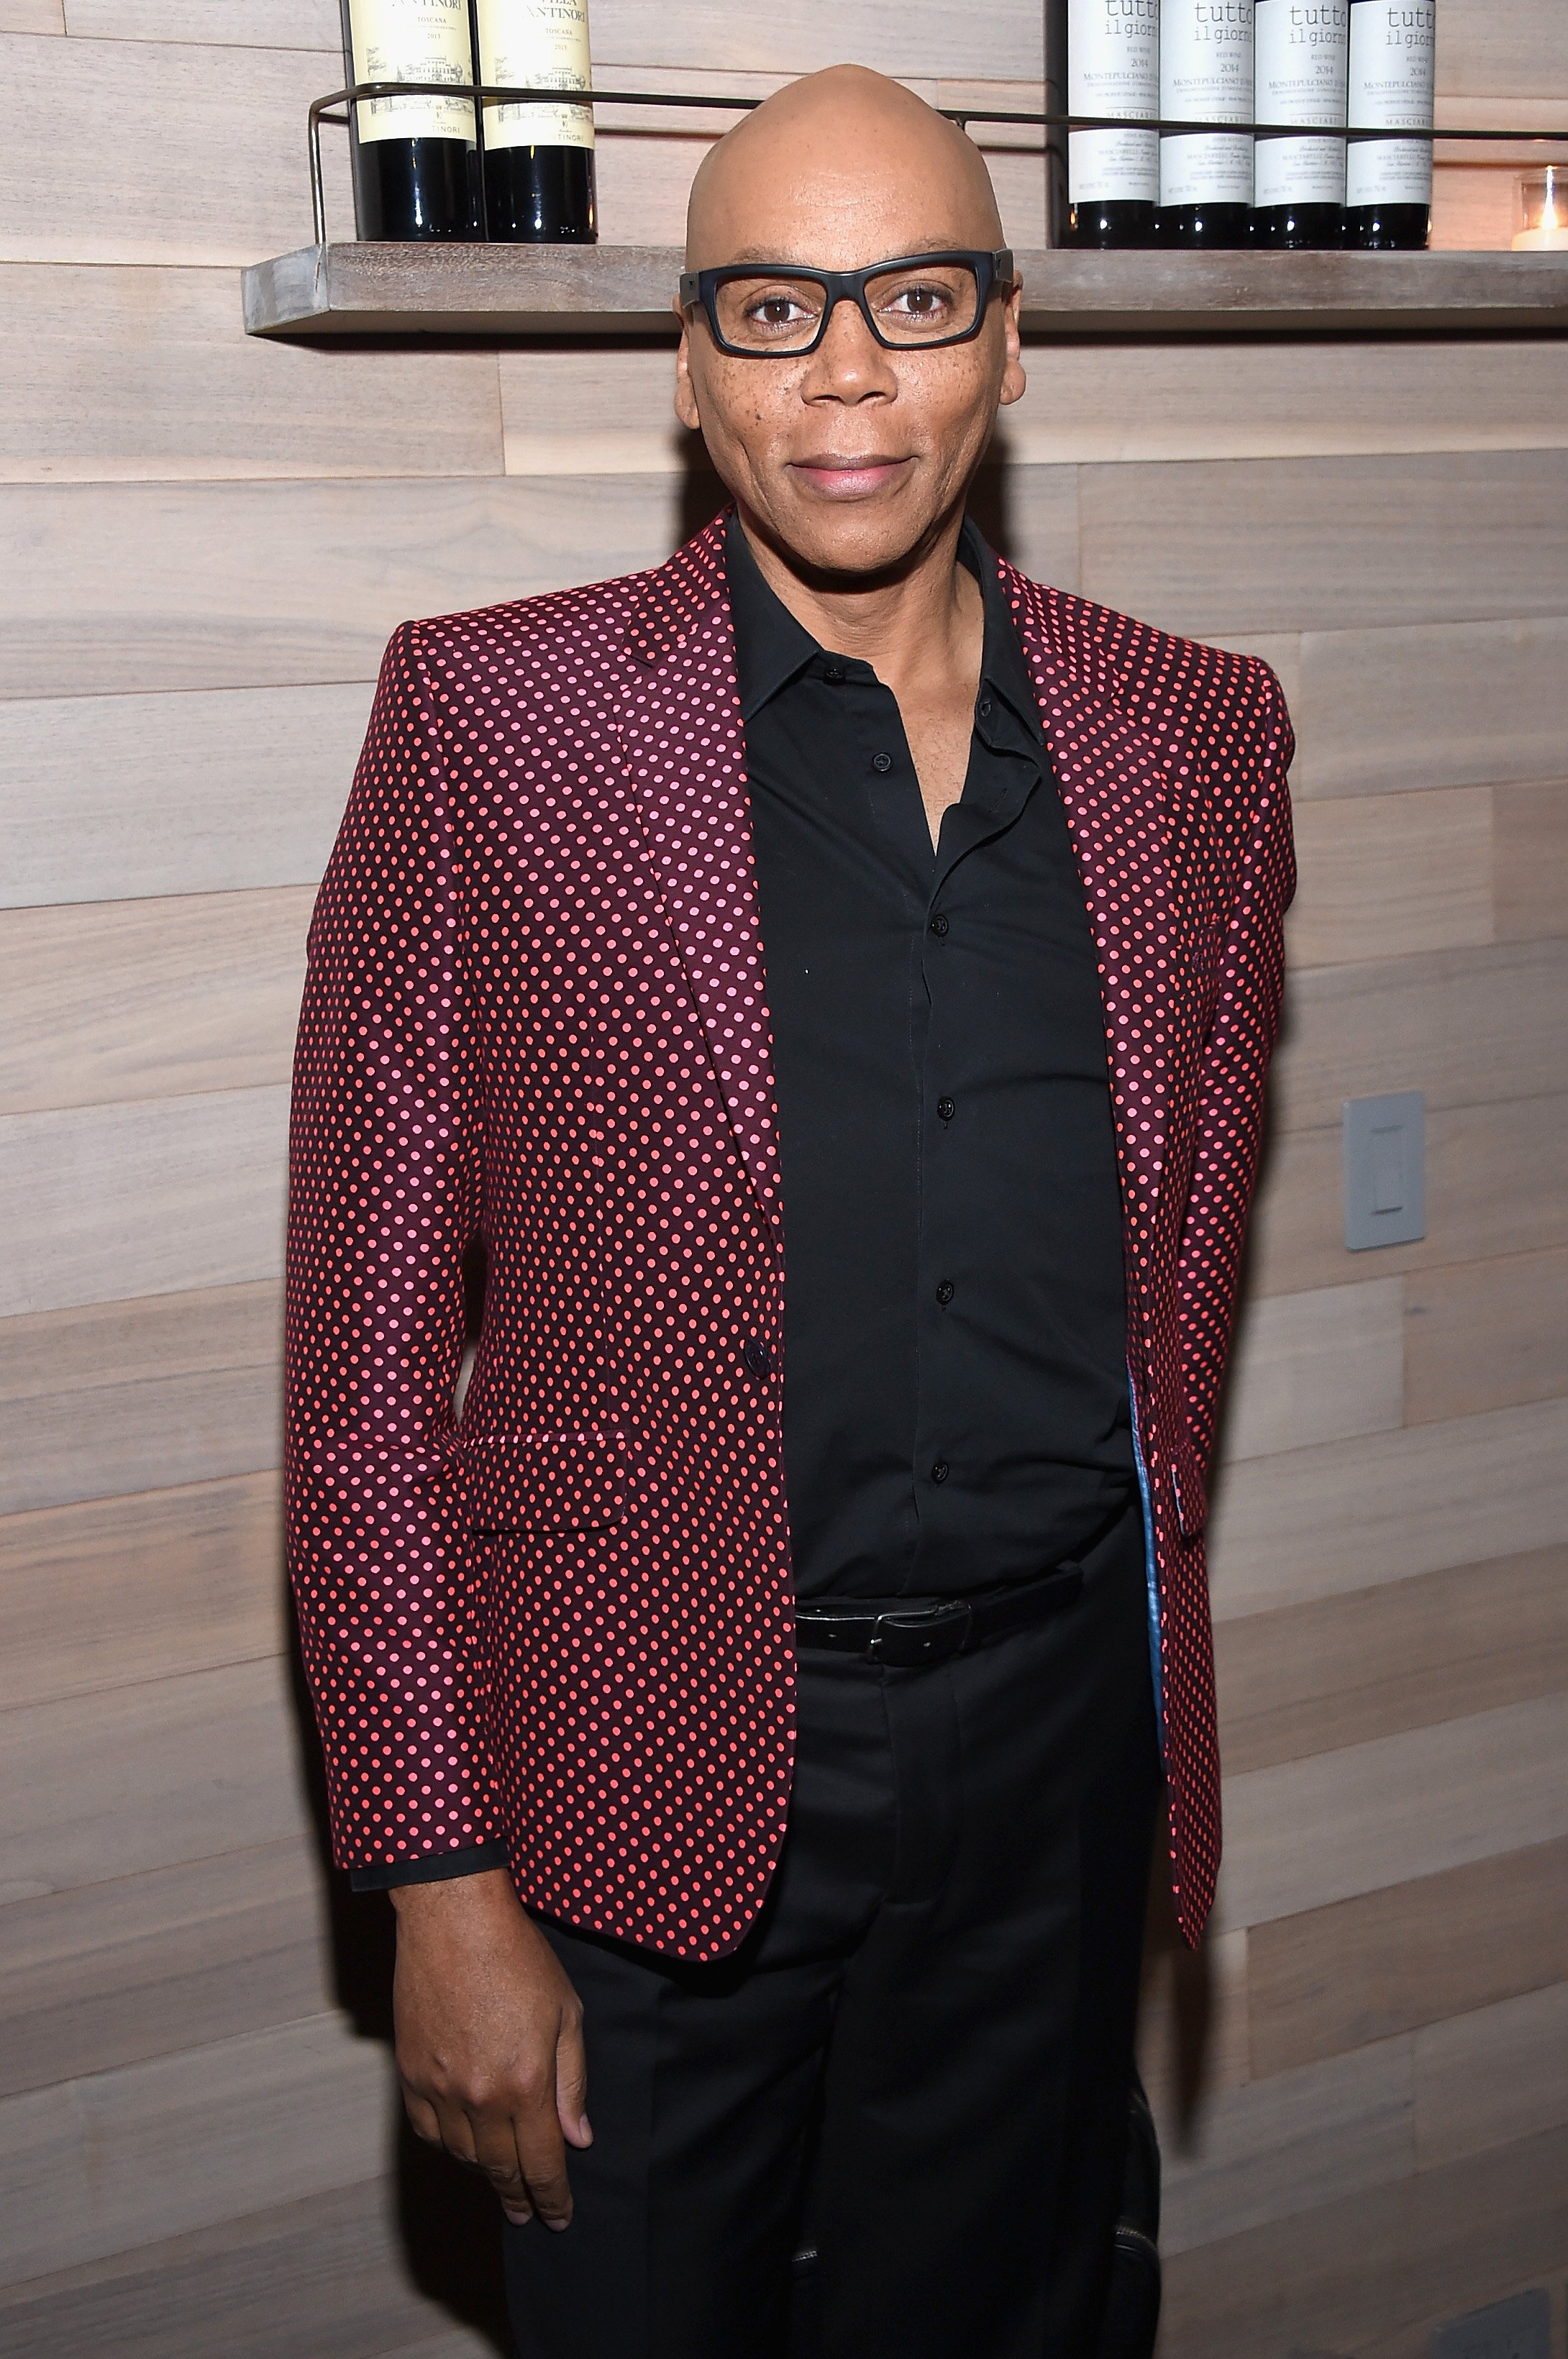 RuPaul attends The Season 2 Premiere Of "Shades Of Blue" after party at All Day on March 1, 2017 in New York City | Photo: Getty Images